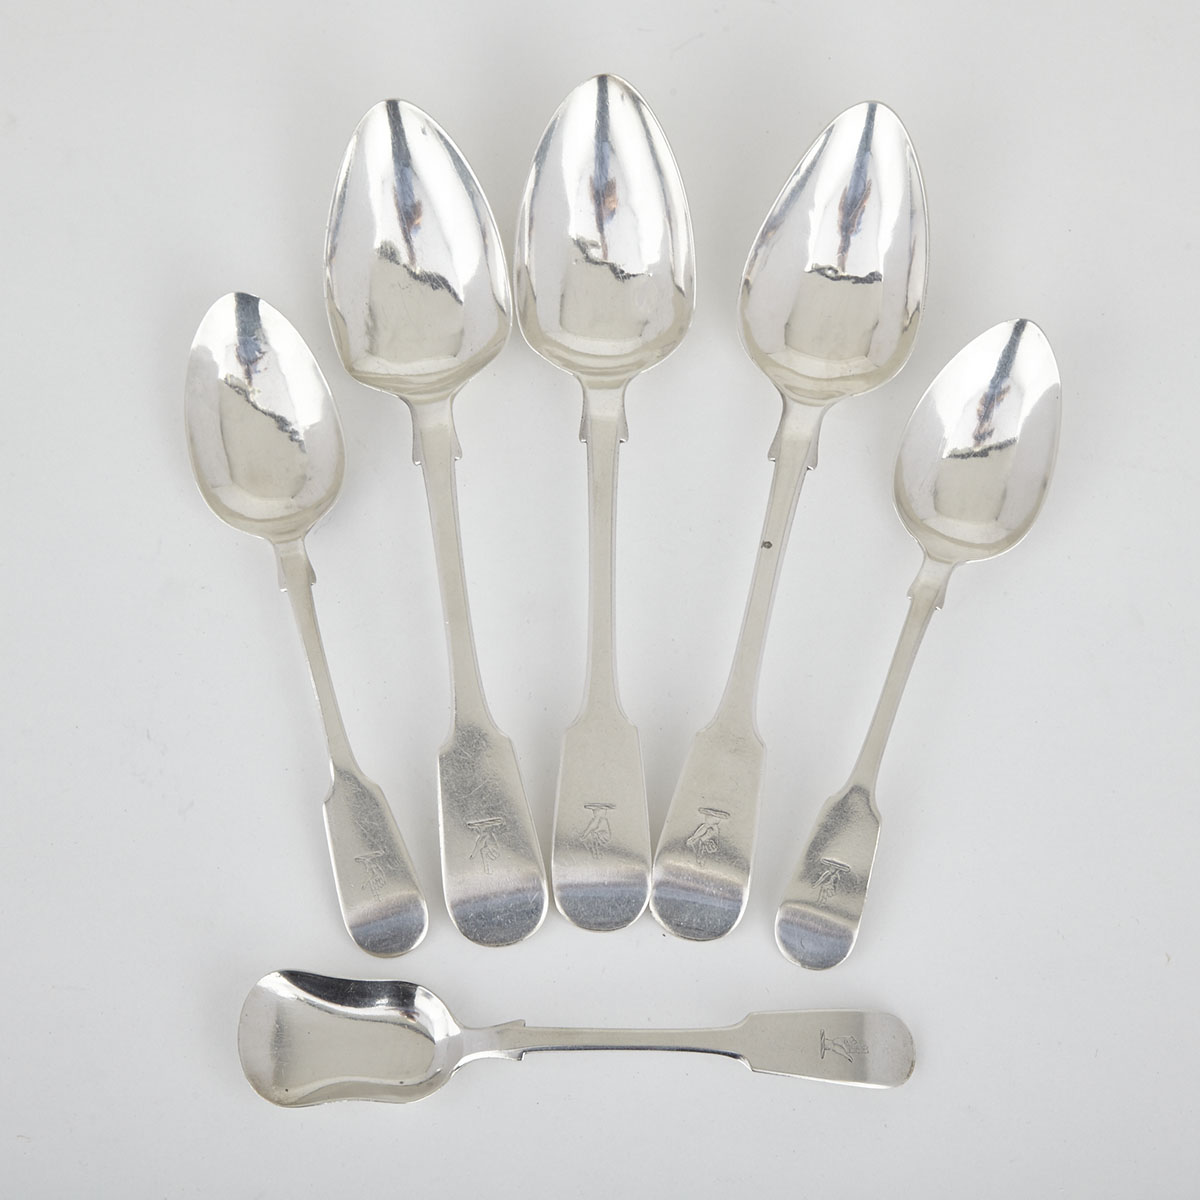 Three Canadian Silver Fiddle Pattern Table Spoons, Two Dessert Spoons and a Sugar Spoon, George Savage, Montreal, Que., c.1825